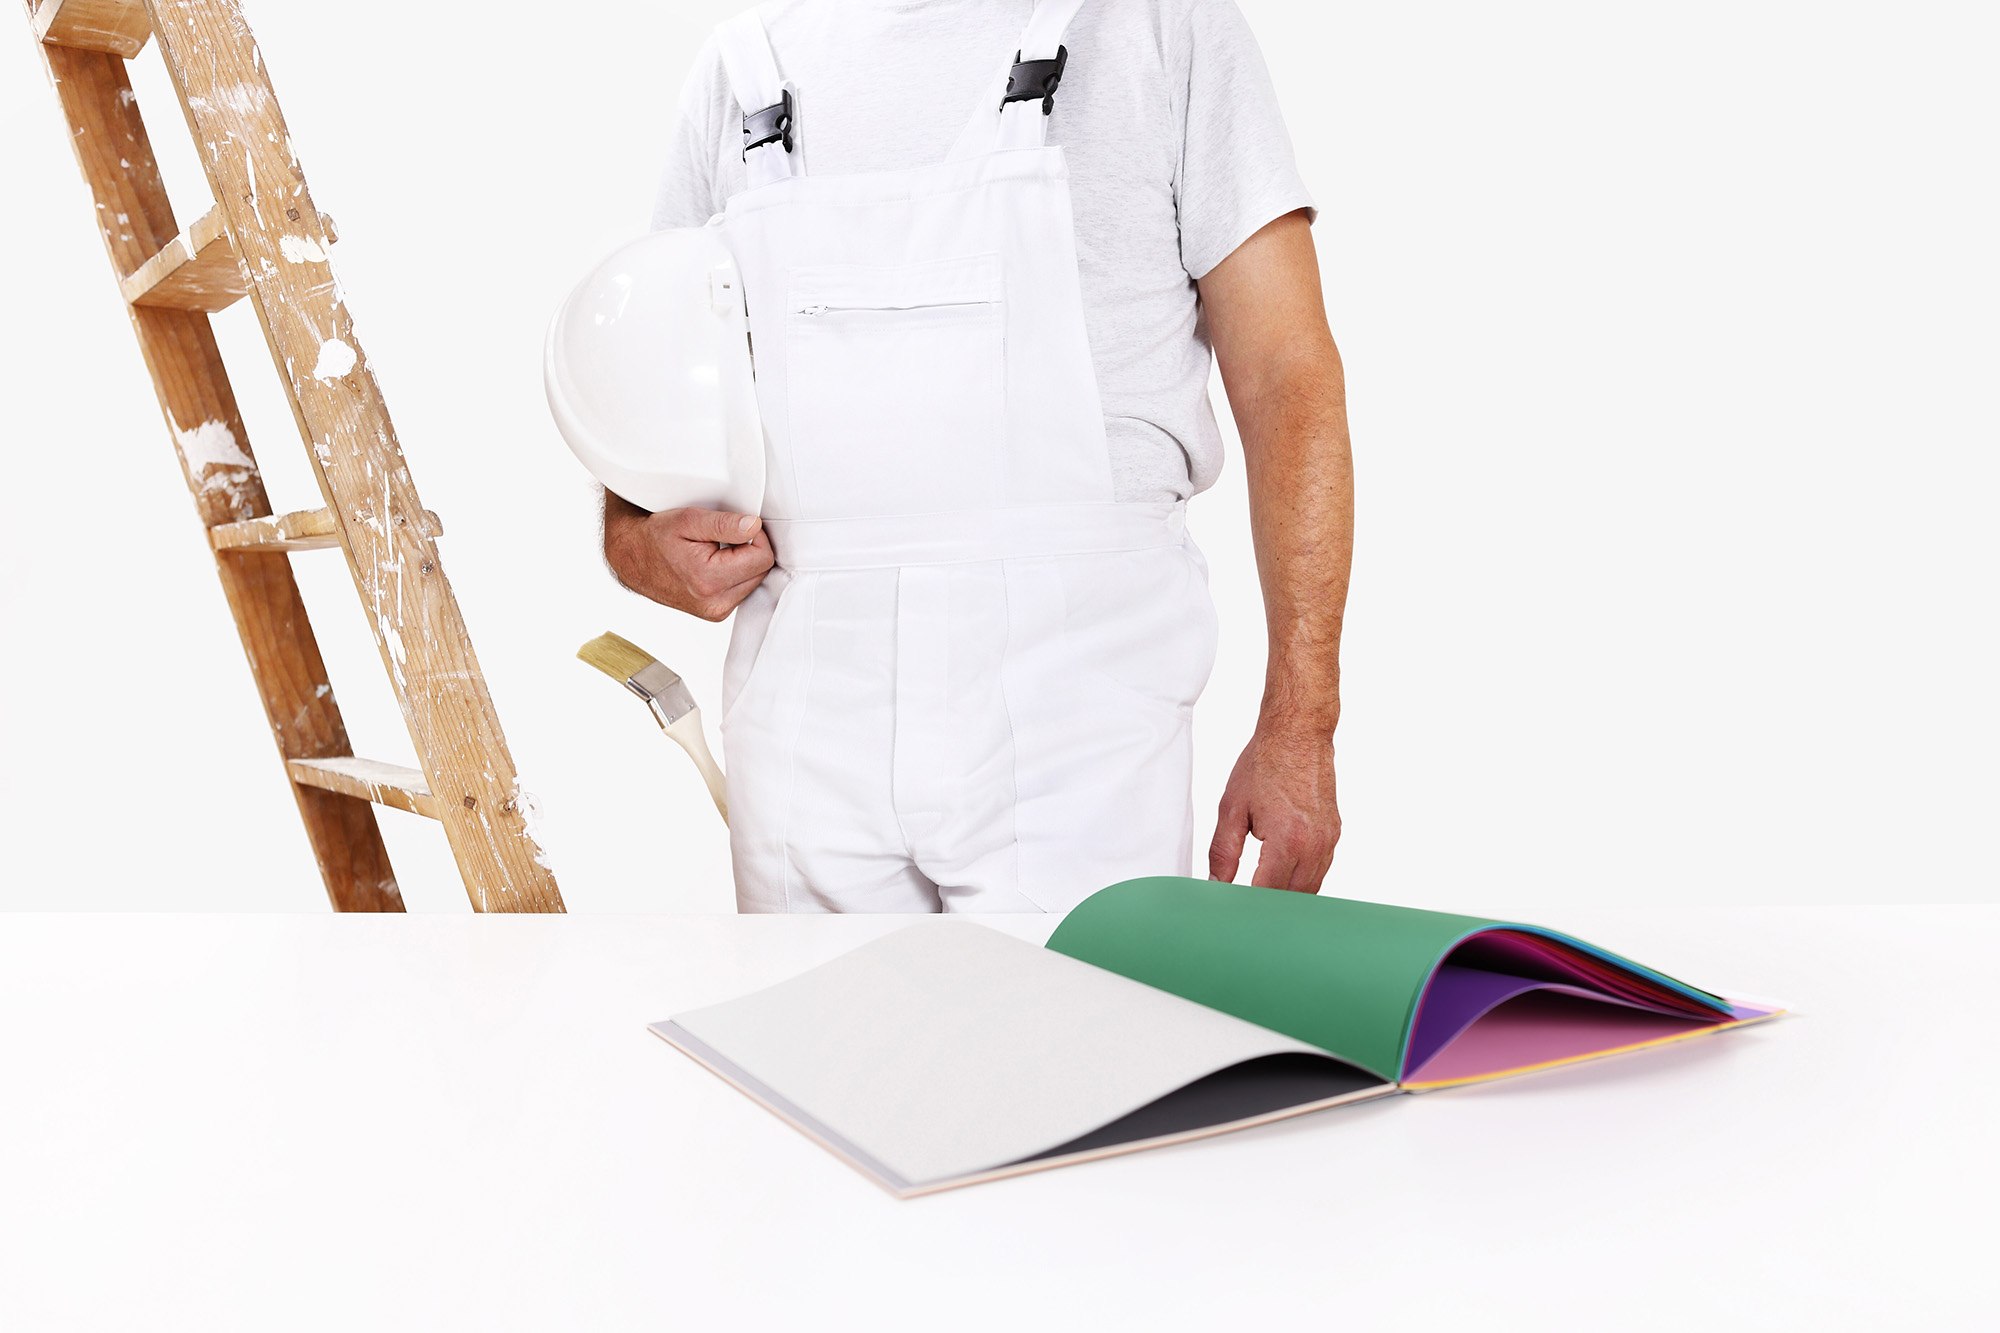 Residential Painters Perth